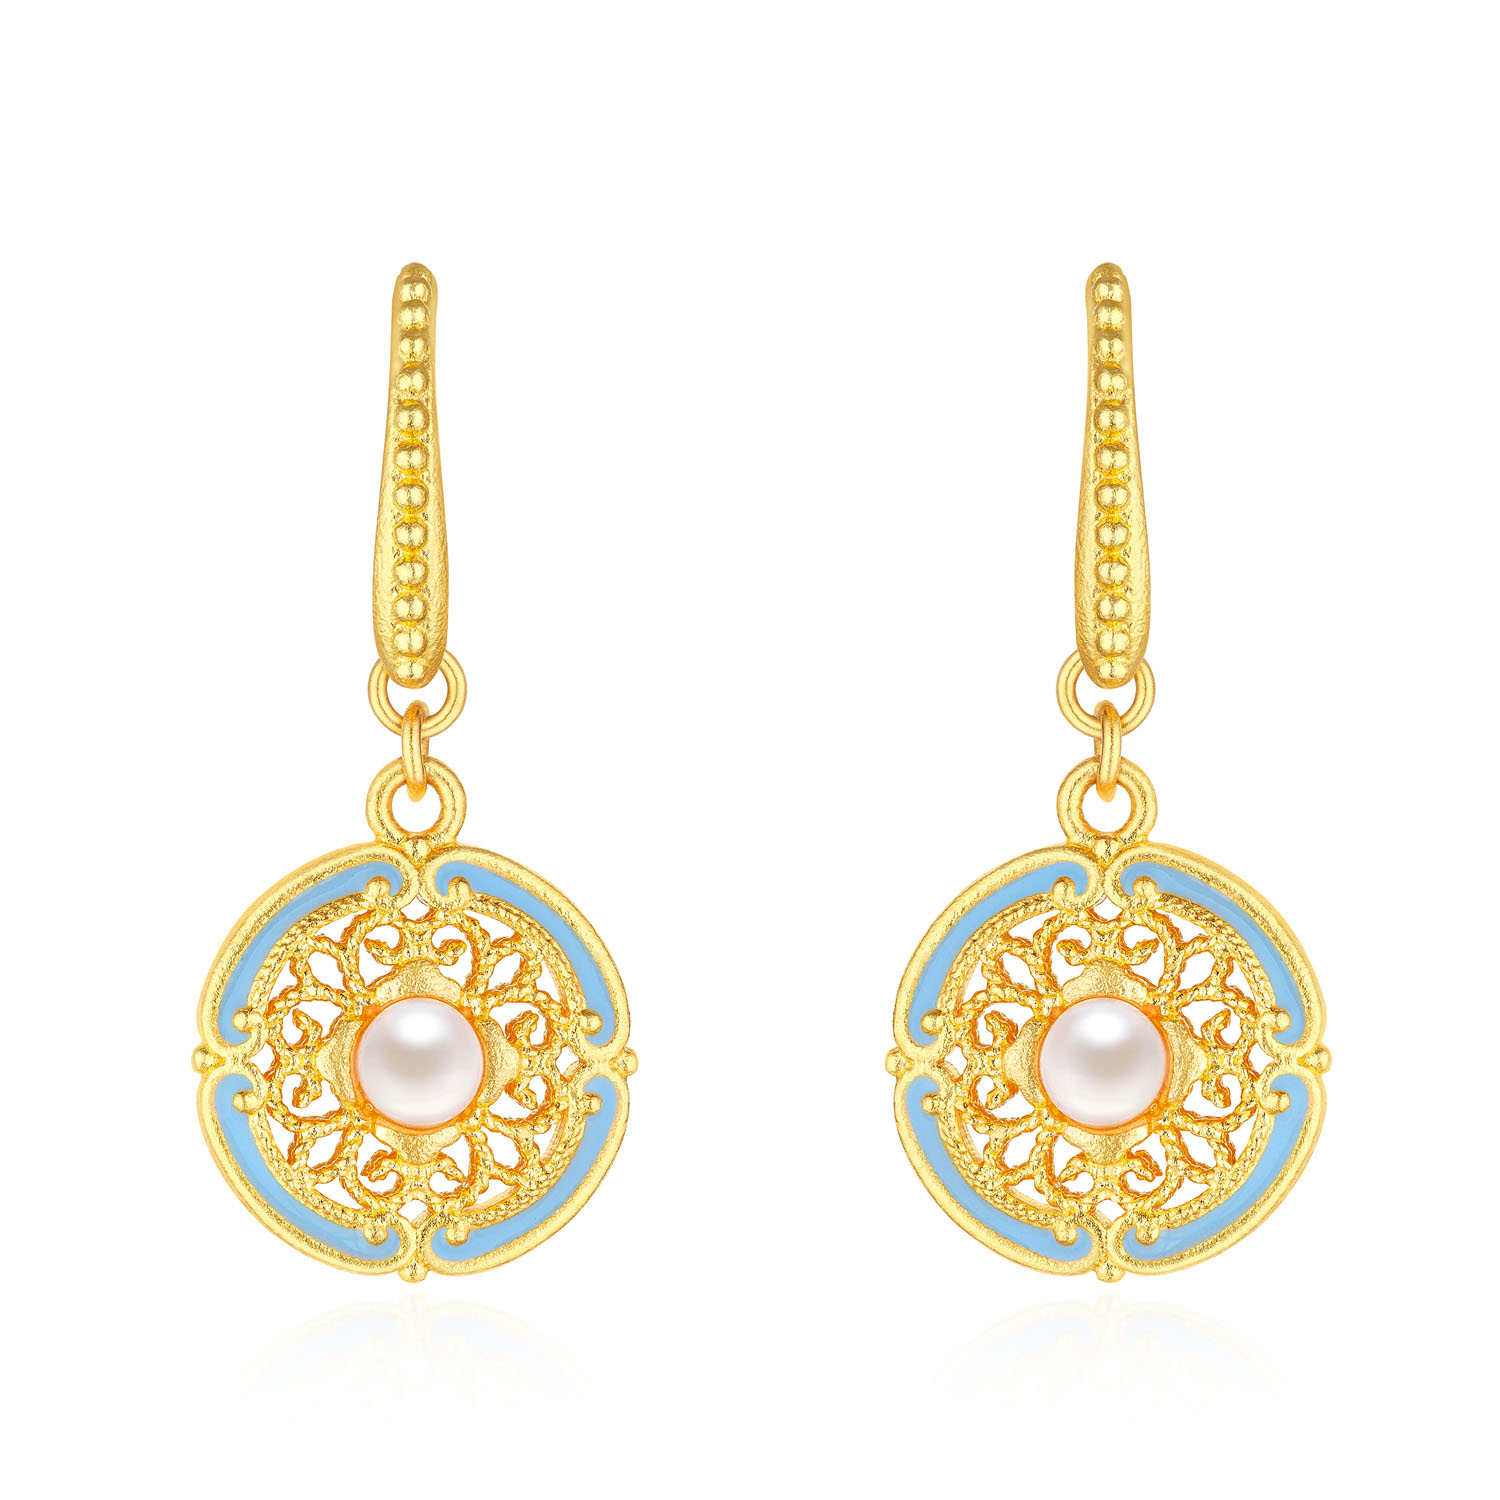 Heirloom Fortune - Charm of Song Dynasty Collection "Flower & Moon" Gold Pearl Earrings